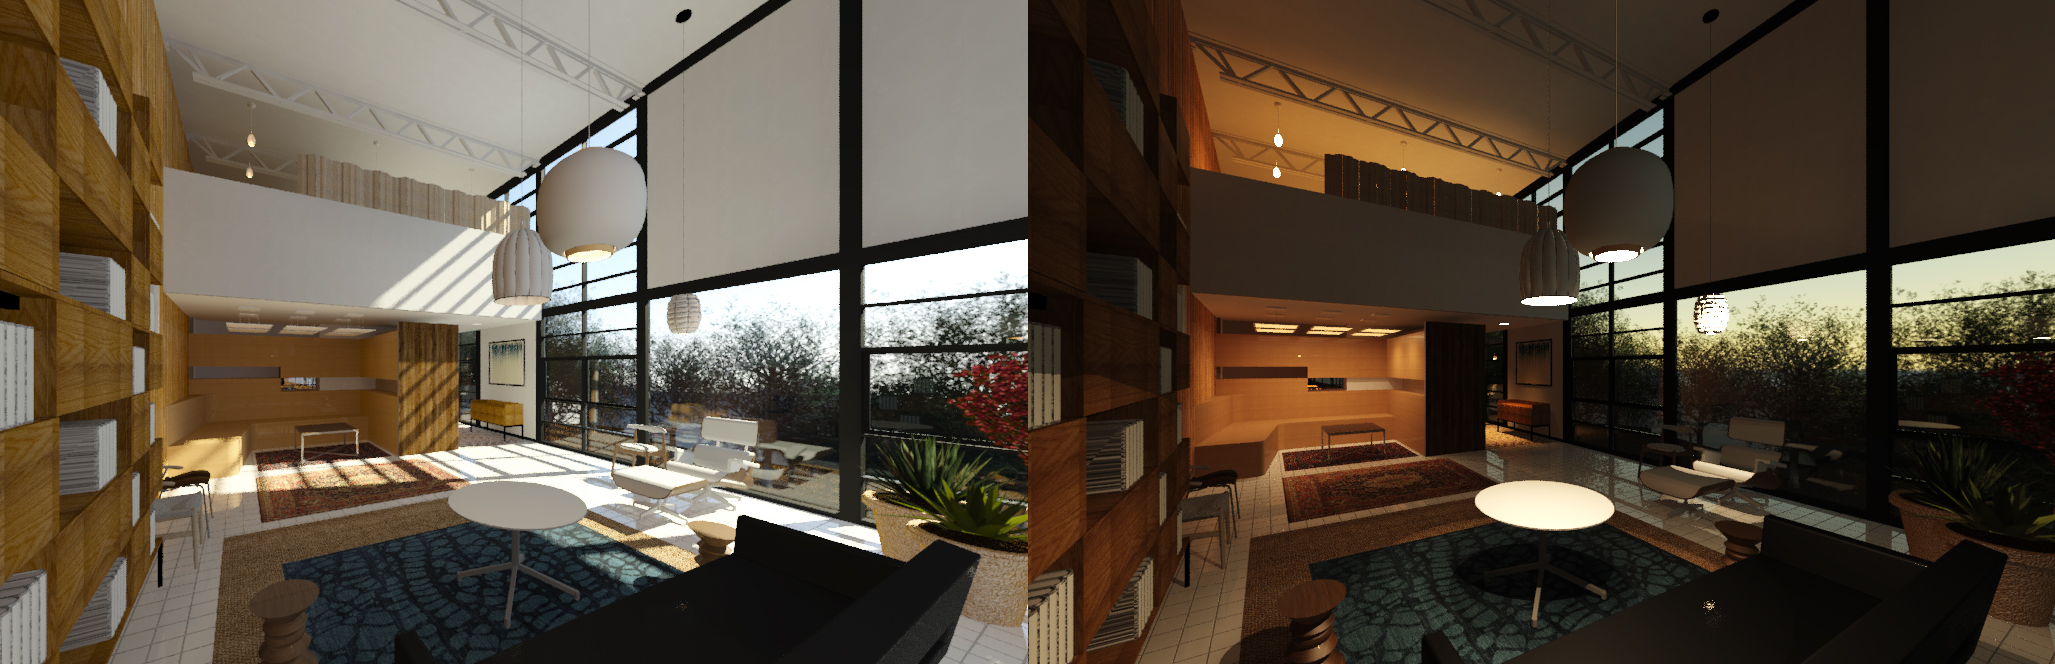 This image shows the session highlight presenting the rendered daytime perspective view and the rendered nighttime perspective view. This is the expected result at the end of this lecture.